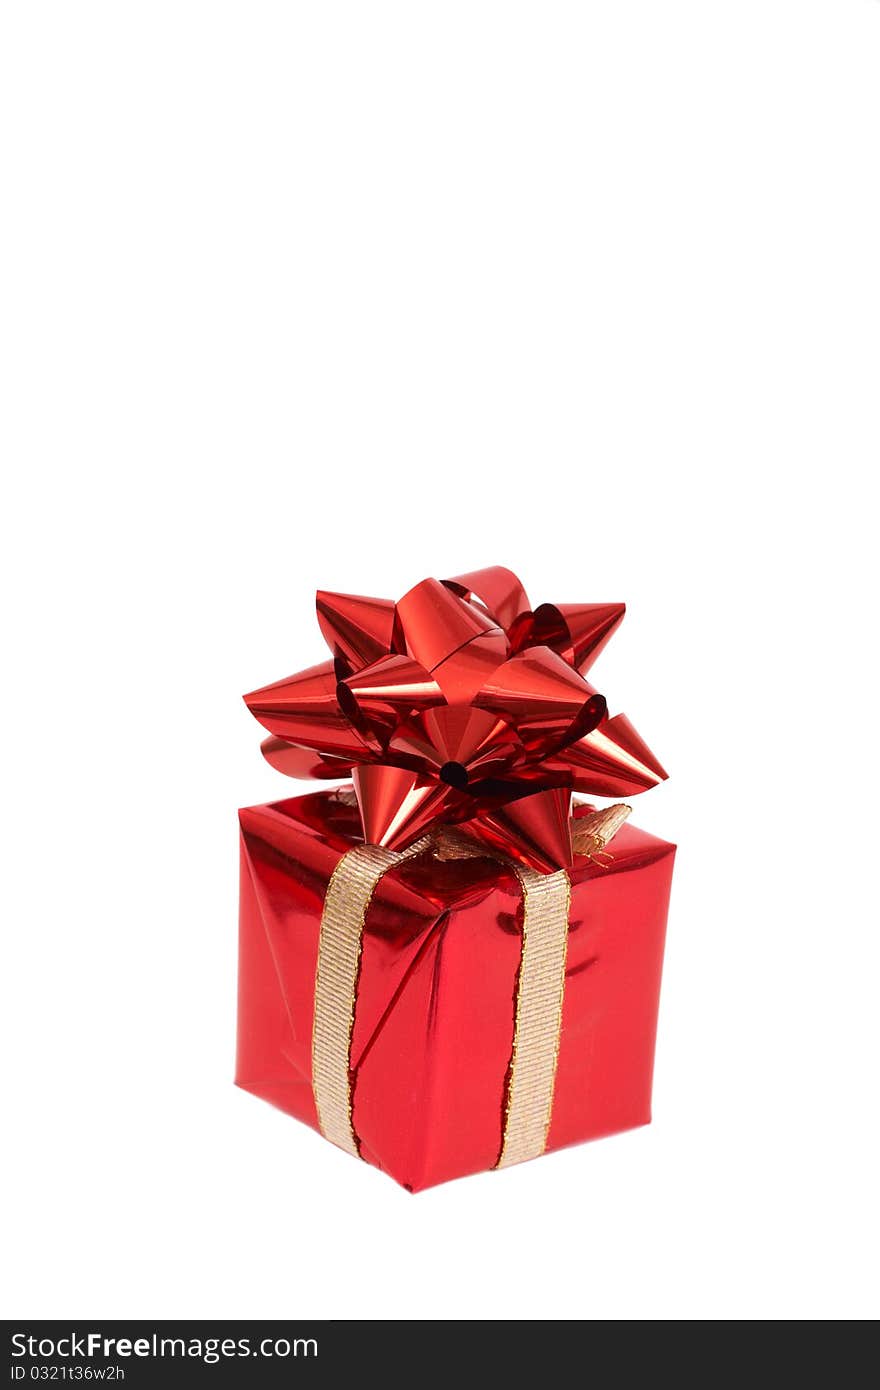 Red gift box with a bow for Christmas or Valentines Day